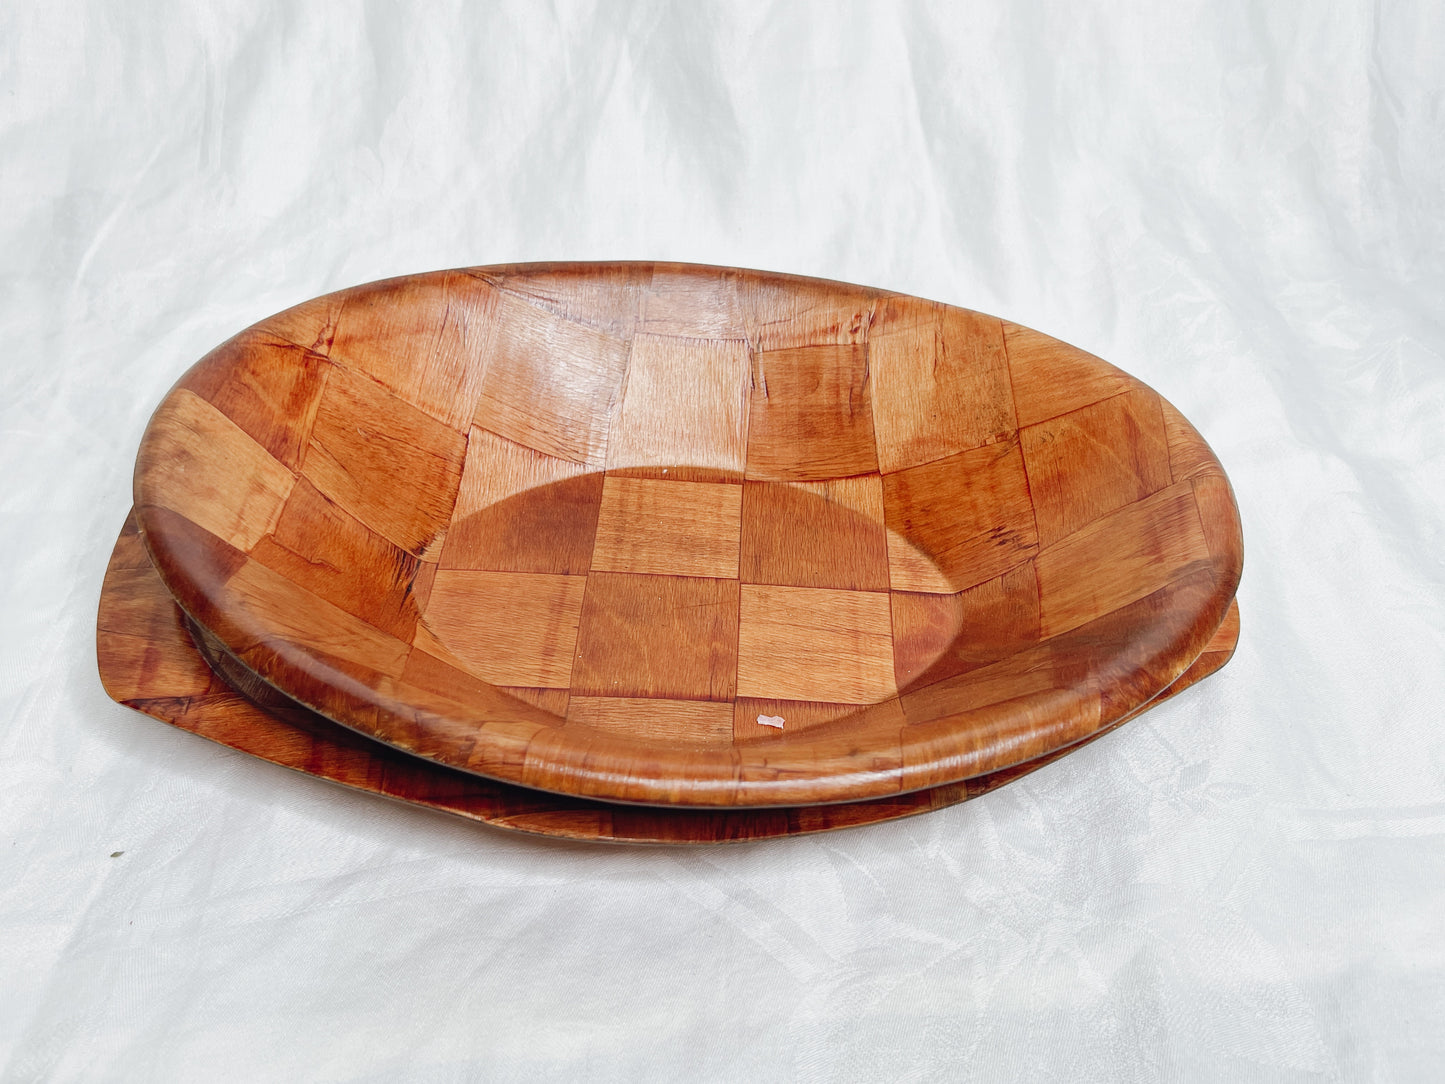 Vintage Winco Wooden Tray and Bowl set